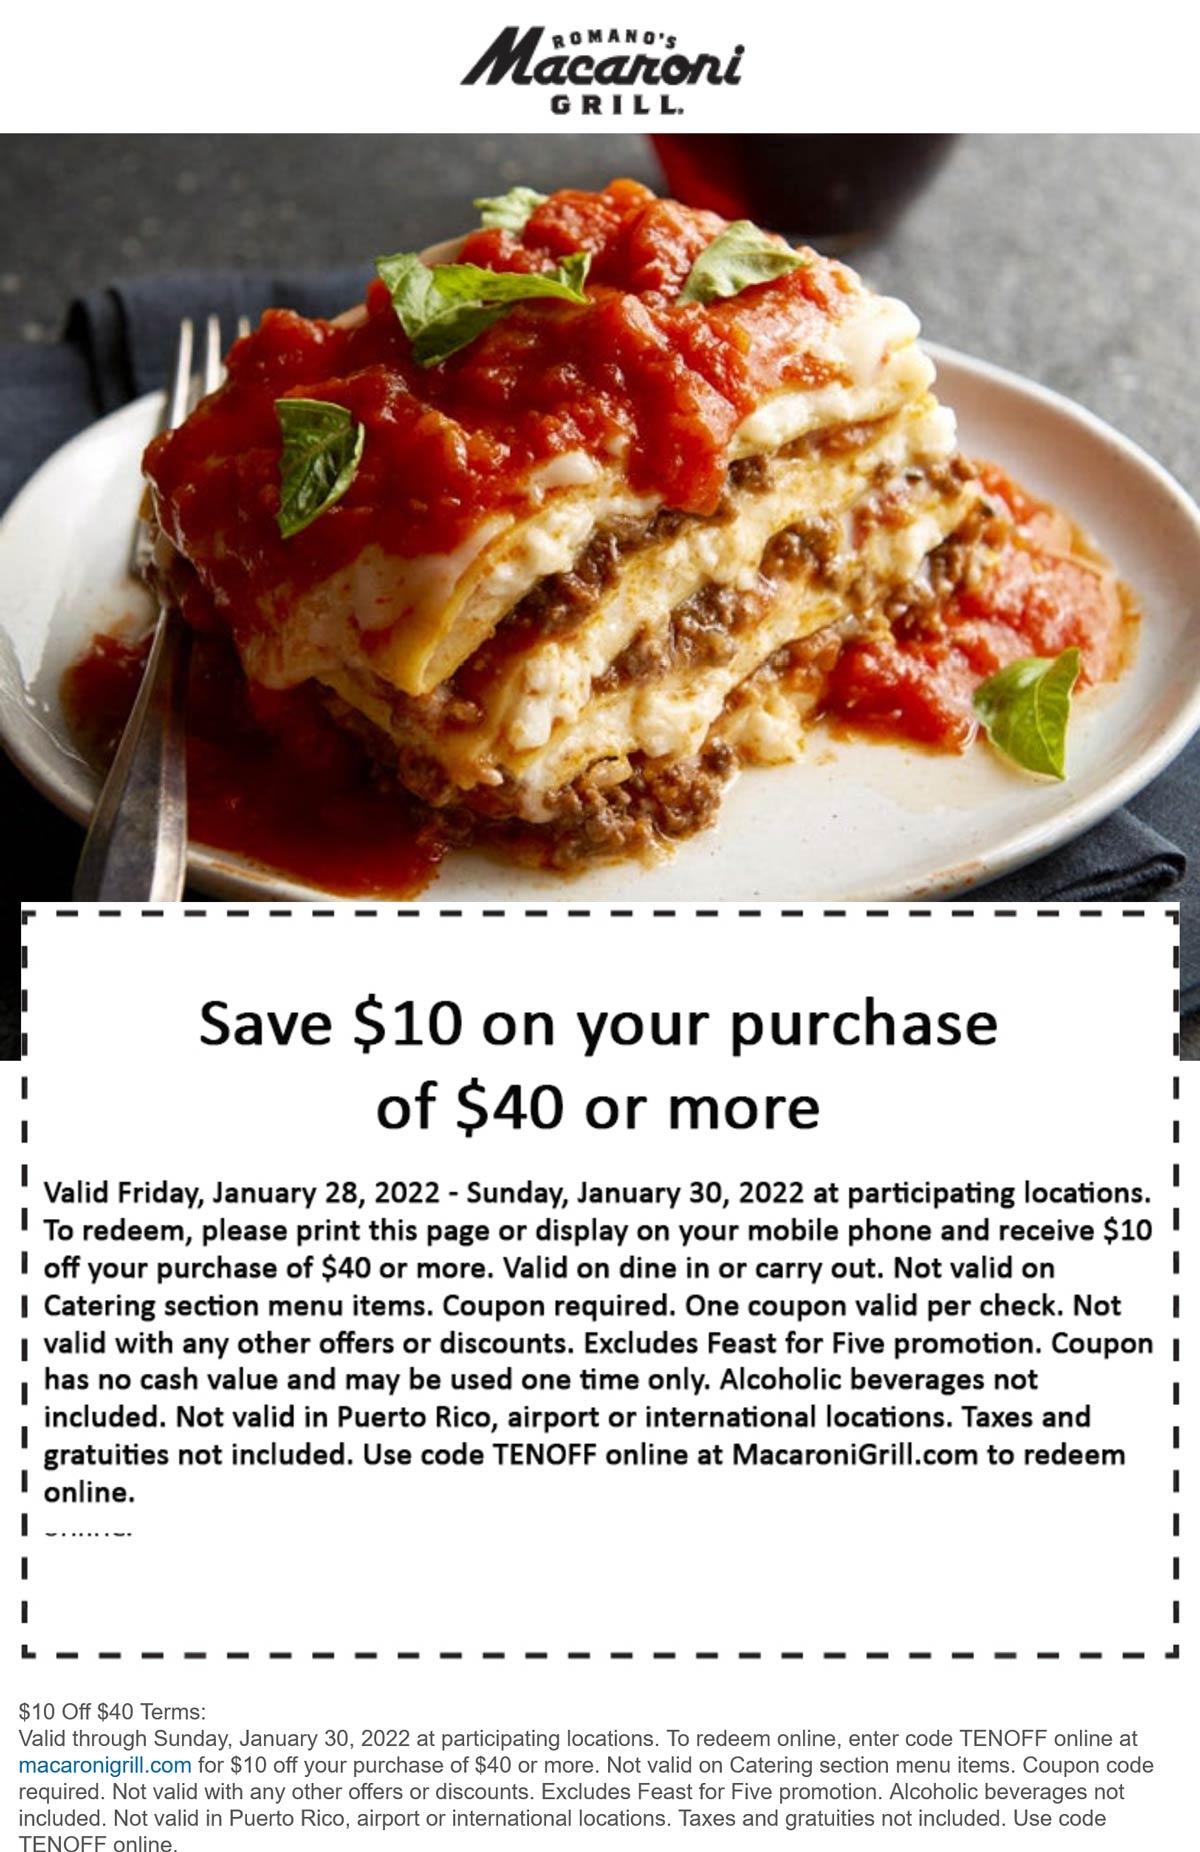 Macaroni Grill restaurants Coupon  $10 off $40 at Macaroni Grill restaurants, or online via promo code TENOFF #macaronigrill 